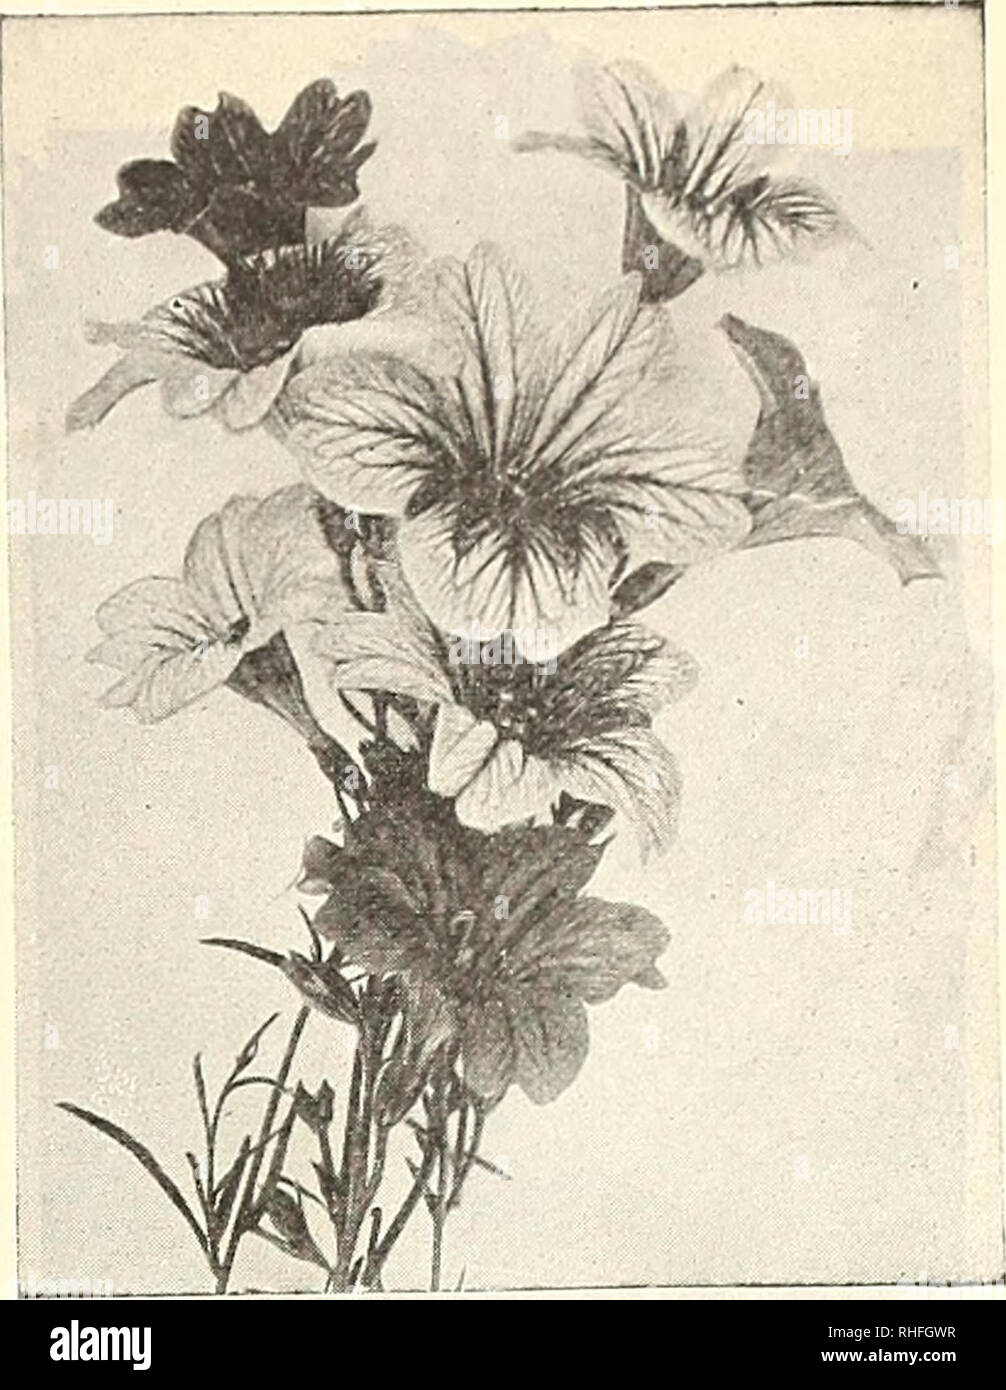 . Bolgiano's capitol city bulbs &amp; seeds : fall 1922. Nurseries (Horticulture) Catalogs; Bulbs (Plants) Catalogs; Seeds Catalogs. Salvia, Bonfire. as trees are starting in leaf, oz. 45 cts. Pkt. 5 cts SCARLET RUNNER BEAN. See page 50. 100. SUNFLOWER, DOUBLE CHRYSANTHEMUM^ FLOWERED. A. Positively the finest sunflower in cultiva- tion. Plants grow 7 feet high. Flowers always perfectly double and of brightest golden-yellow. Pkt. 5 cts,; oz. 30c. N24. SALPIQLOSIS. A. An exceedingly beautiful, showy flower, of purple, red, yellow, buff and blue, all deli- cately veined. Pkt. 5 cts.; y4 oz. 35 ct Stock Photo